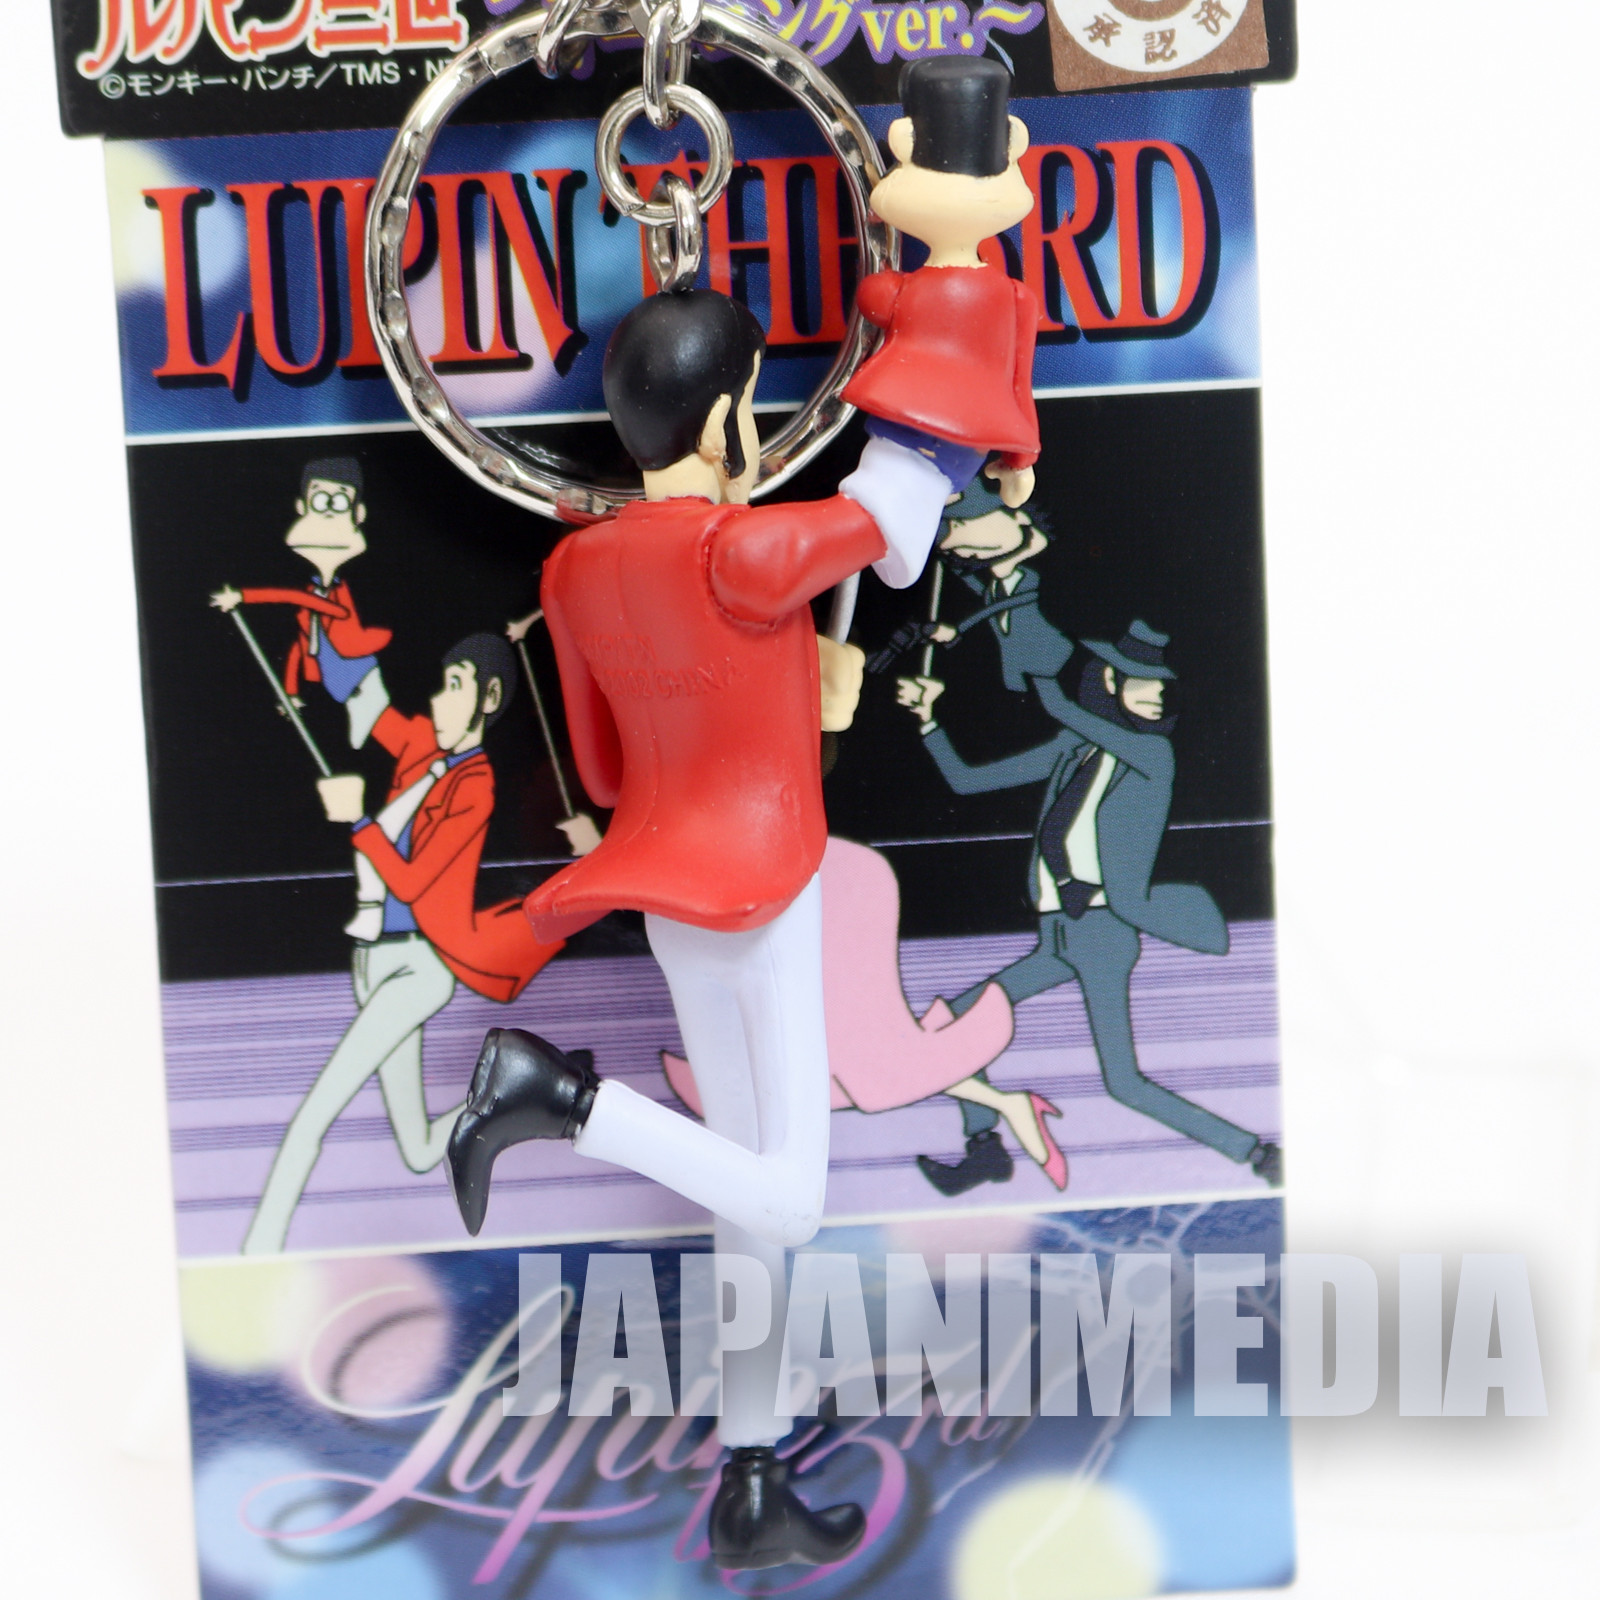 Lupin the Third (3rd) LUPIN Figure Keychain Opening JAPAN